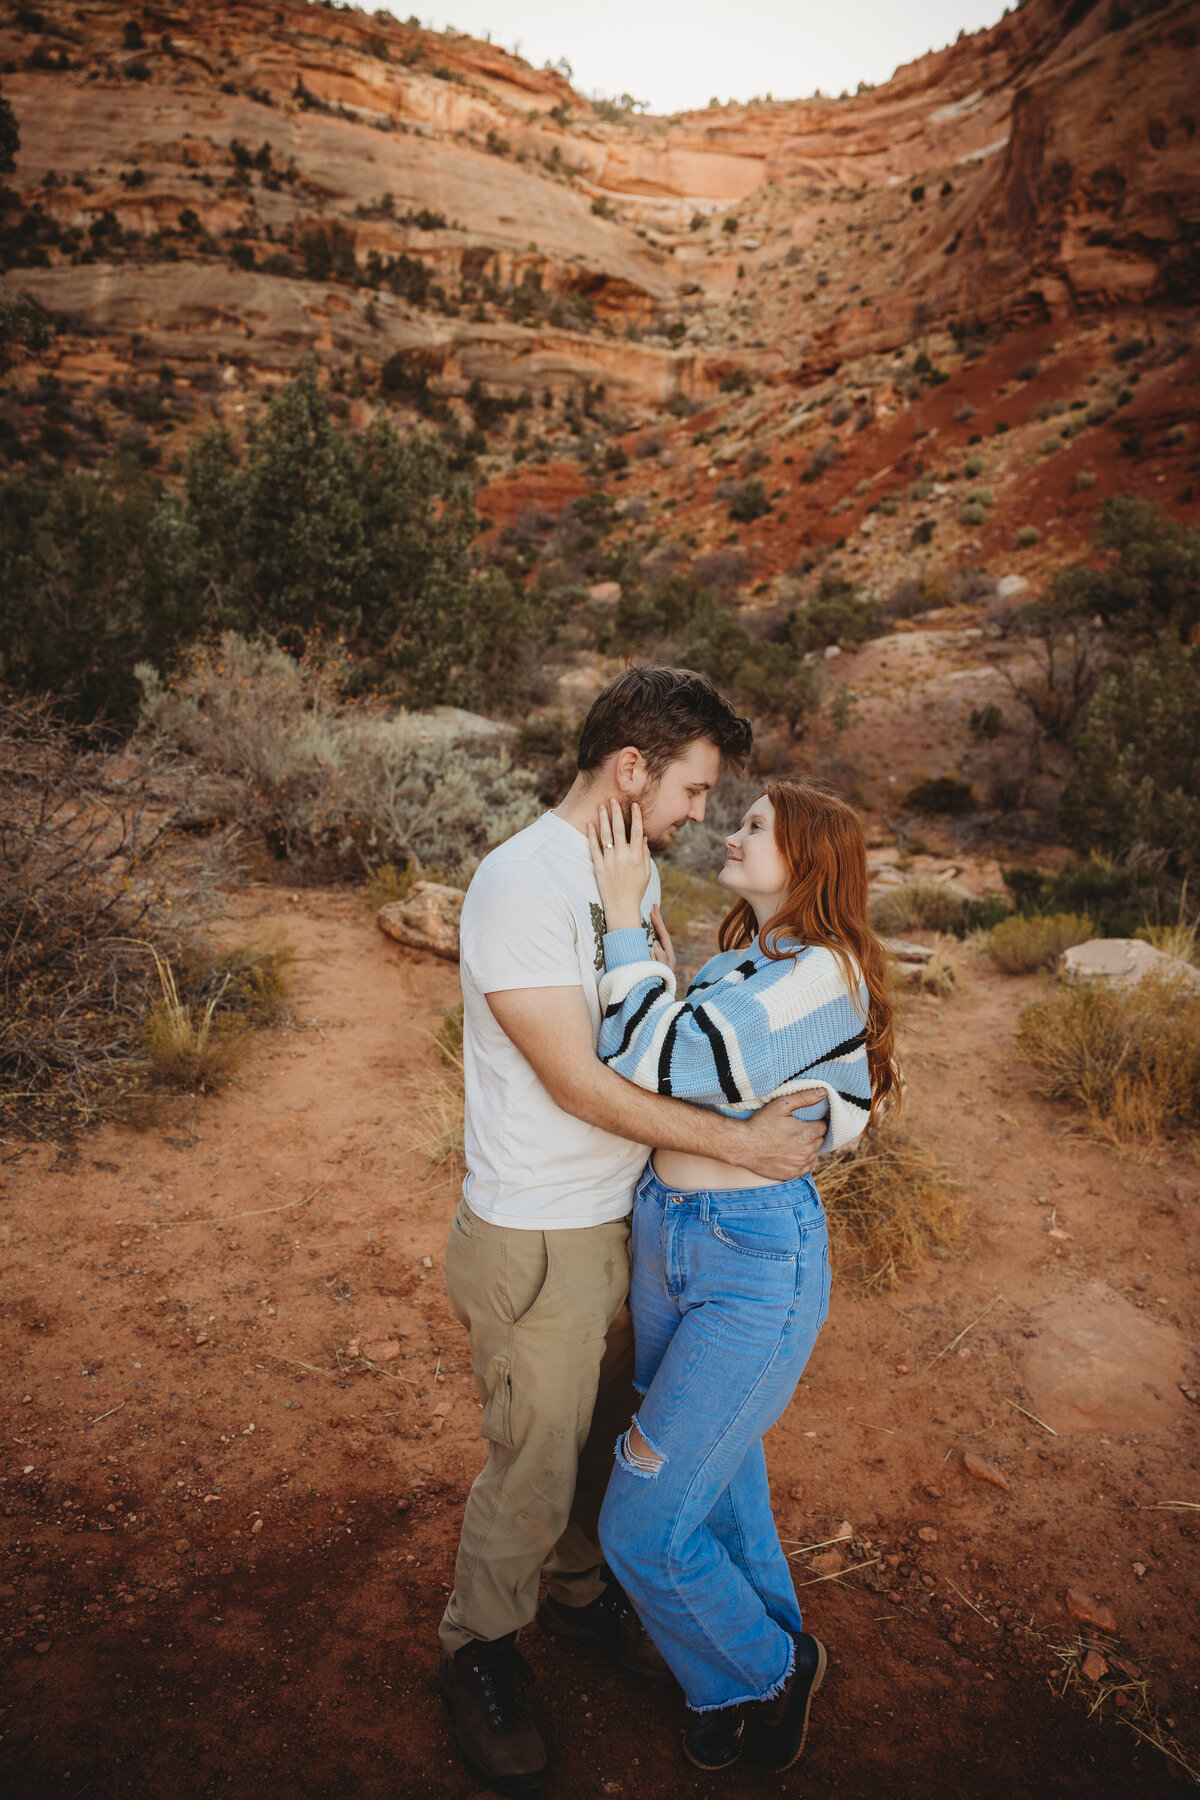 A couple wraps their arms around each other and stare at each other lovingly amidst the red rocks of the landscape.